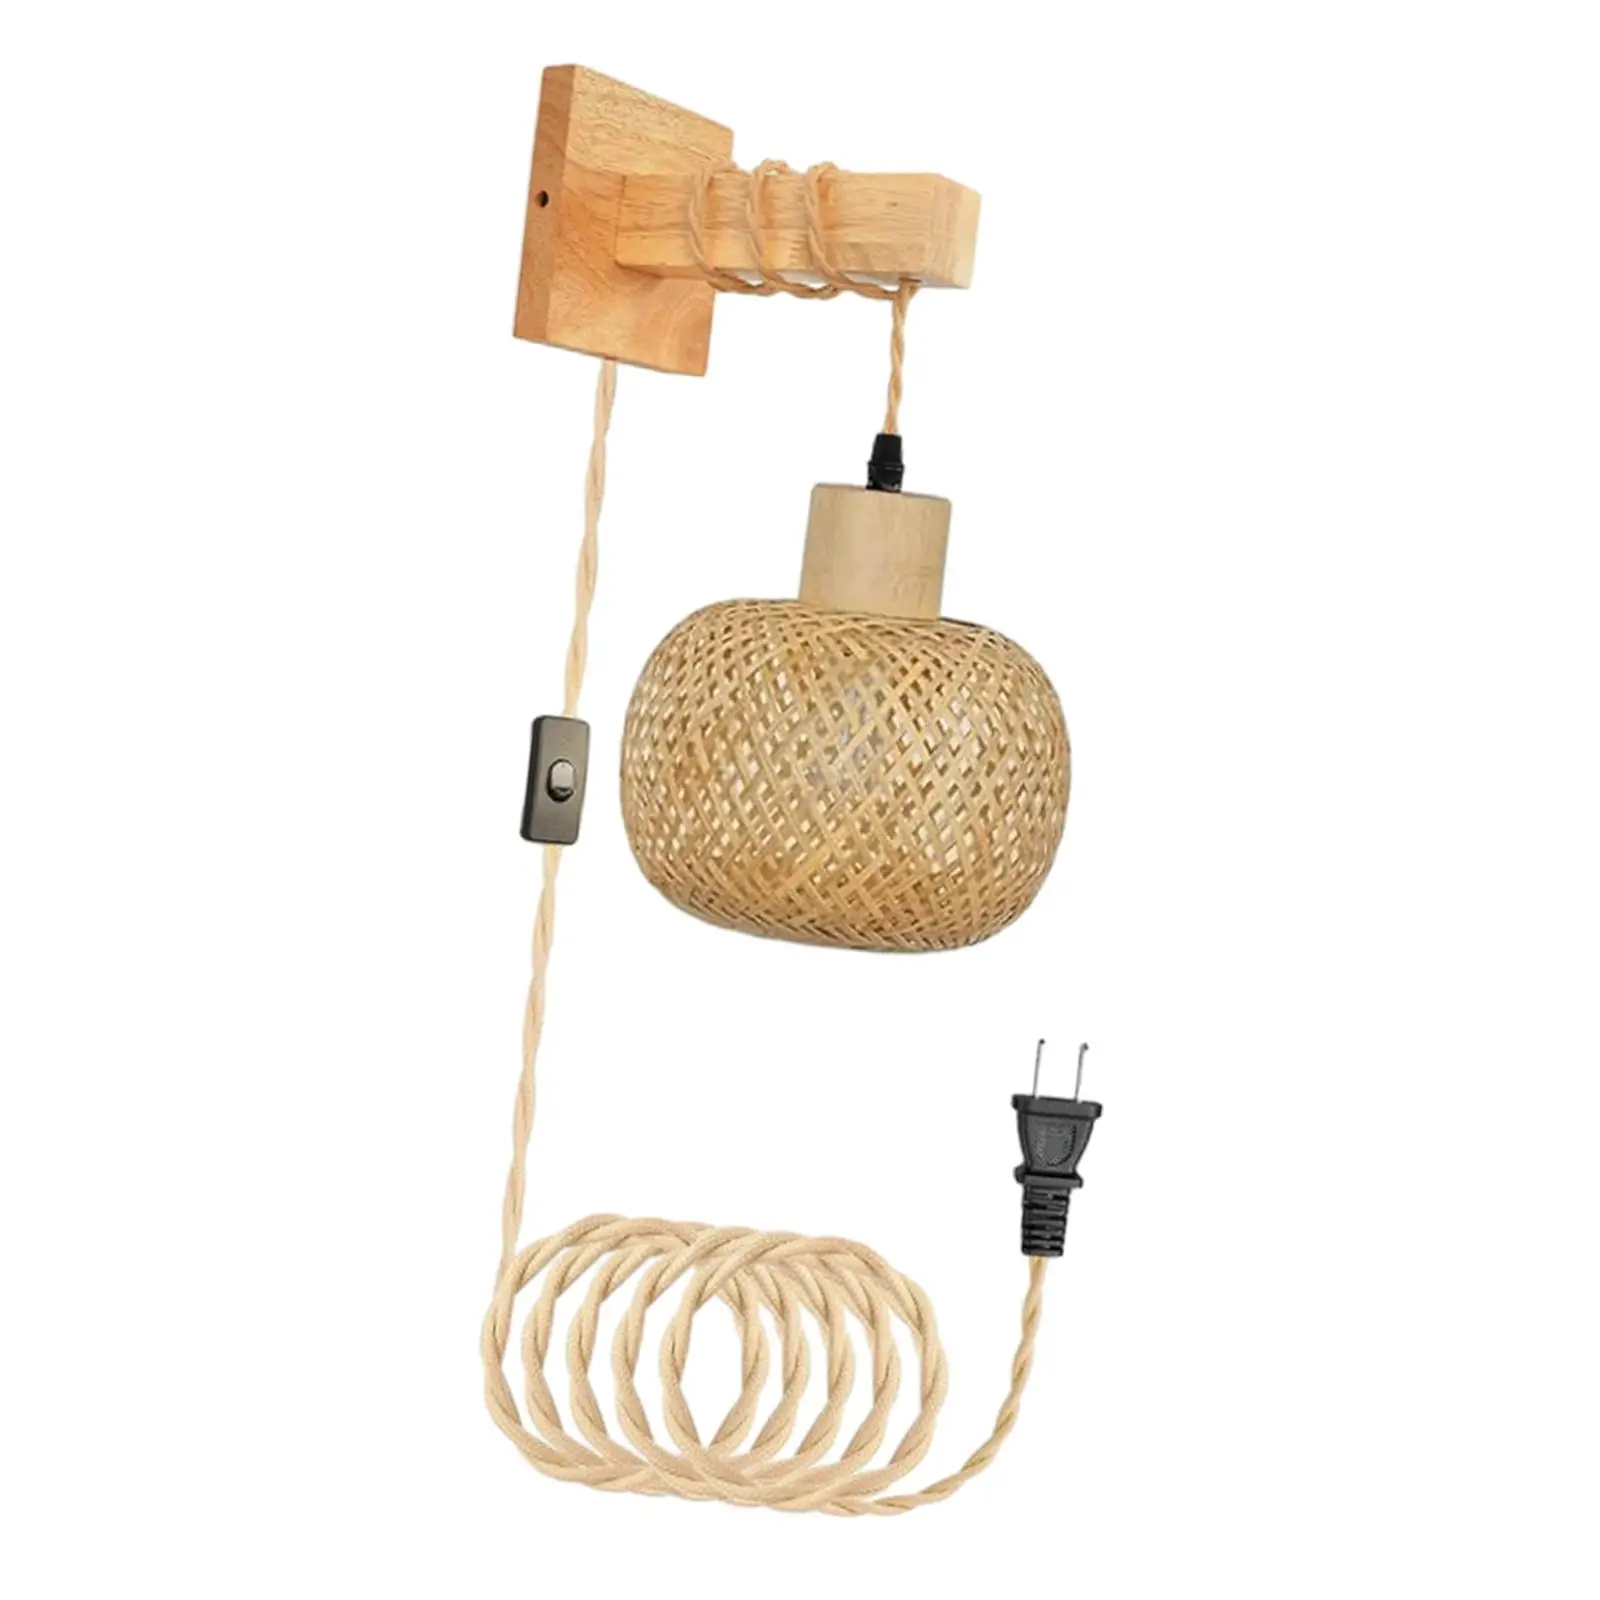 Bamboo Wall Sconce E26 Base Rustic Wall Mount Sconce Decorative Plug in Pendant Light for Hallway Home Bedroom Farmhouse Kitchen